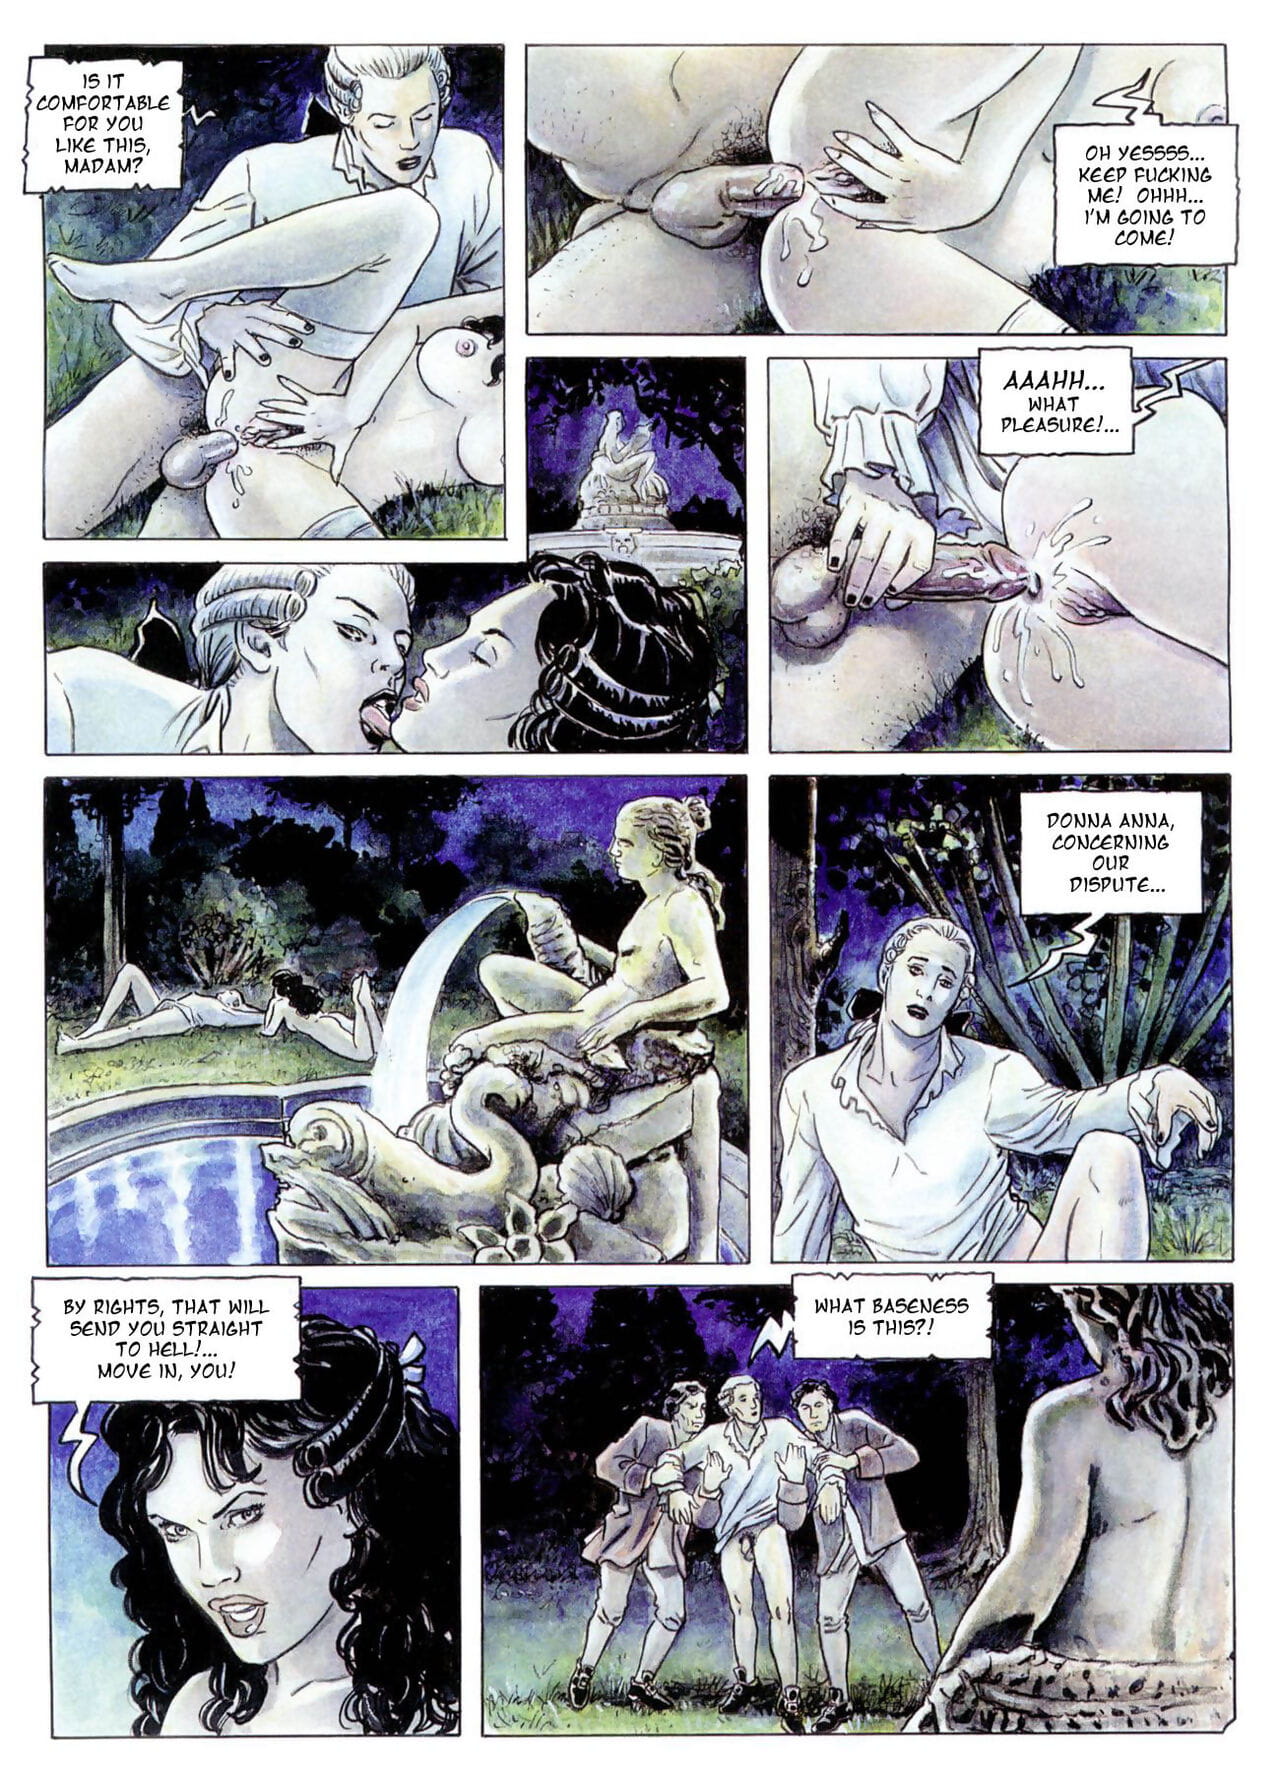 Don Giovanni - part 2 page 1